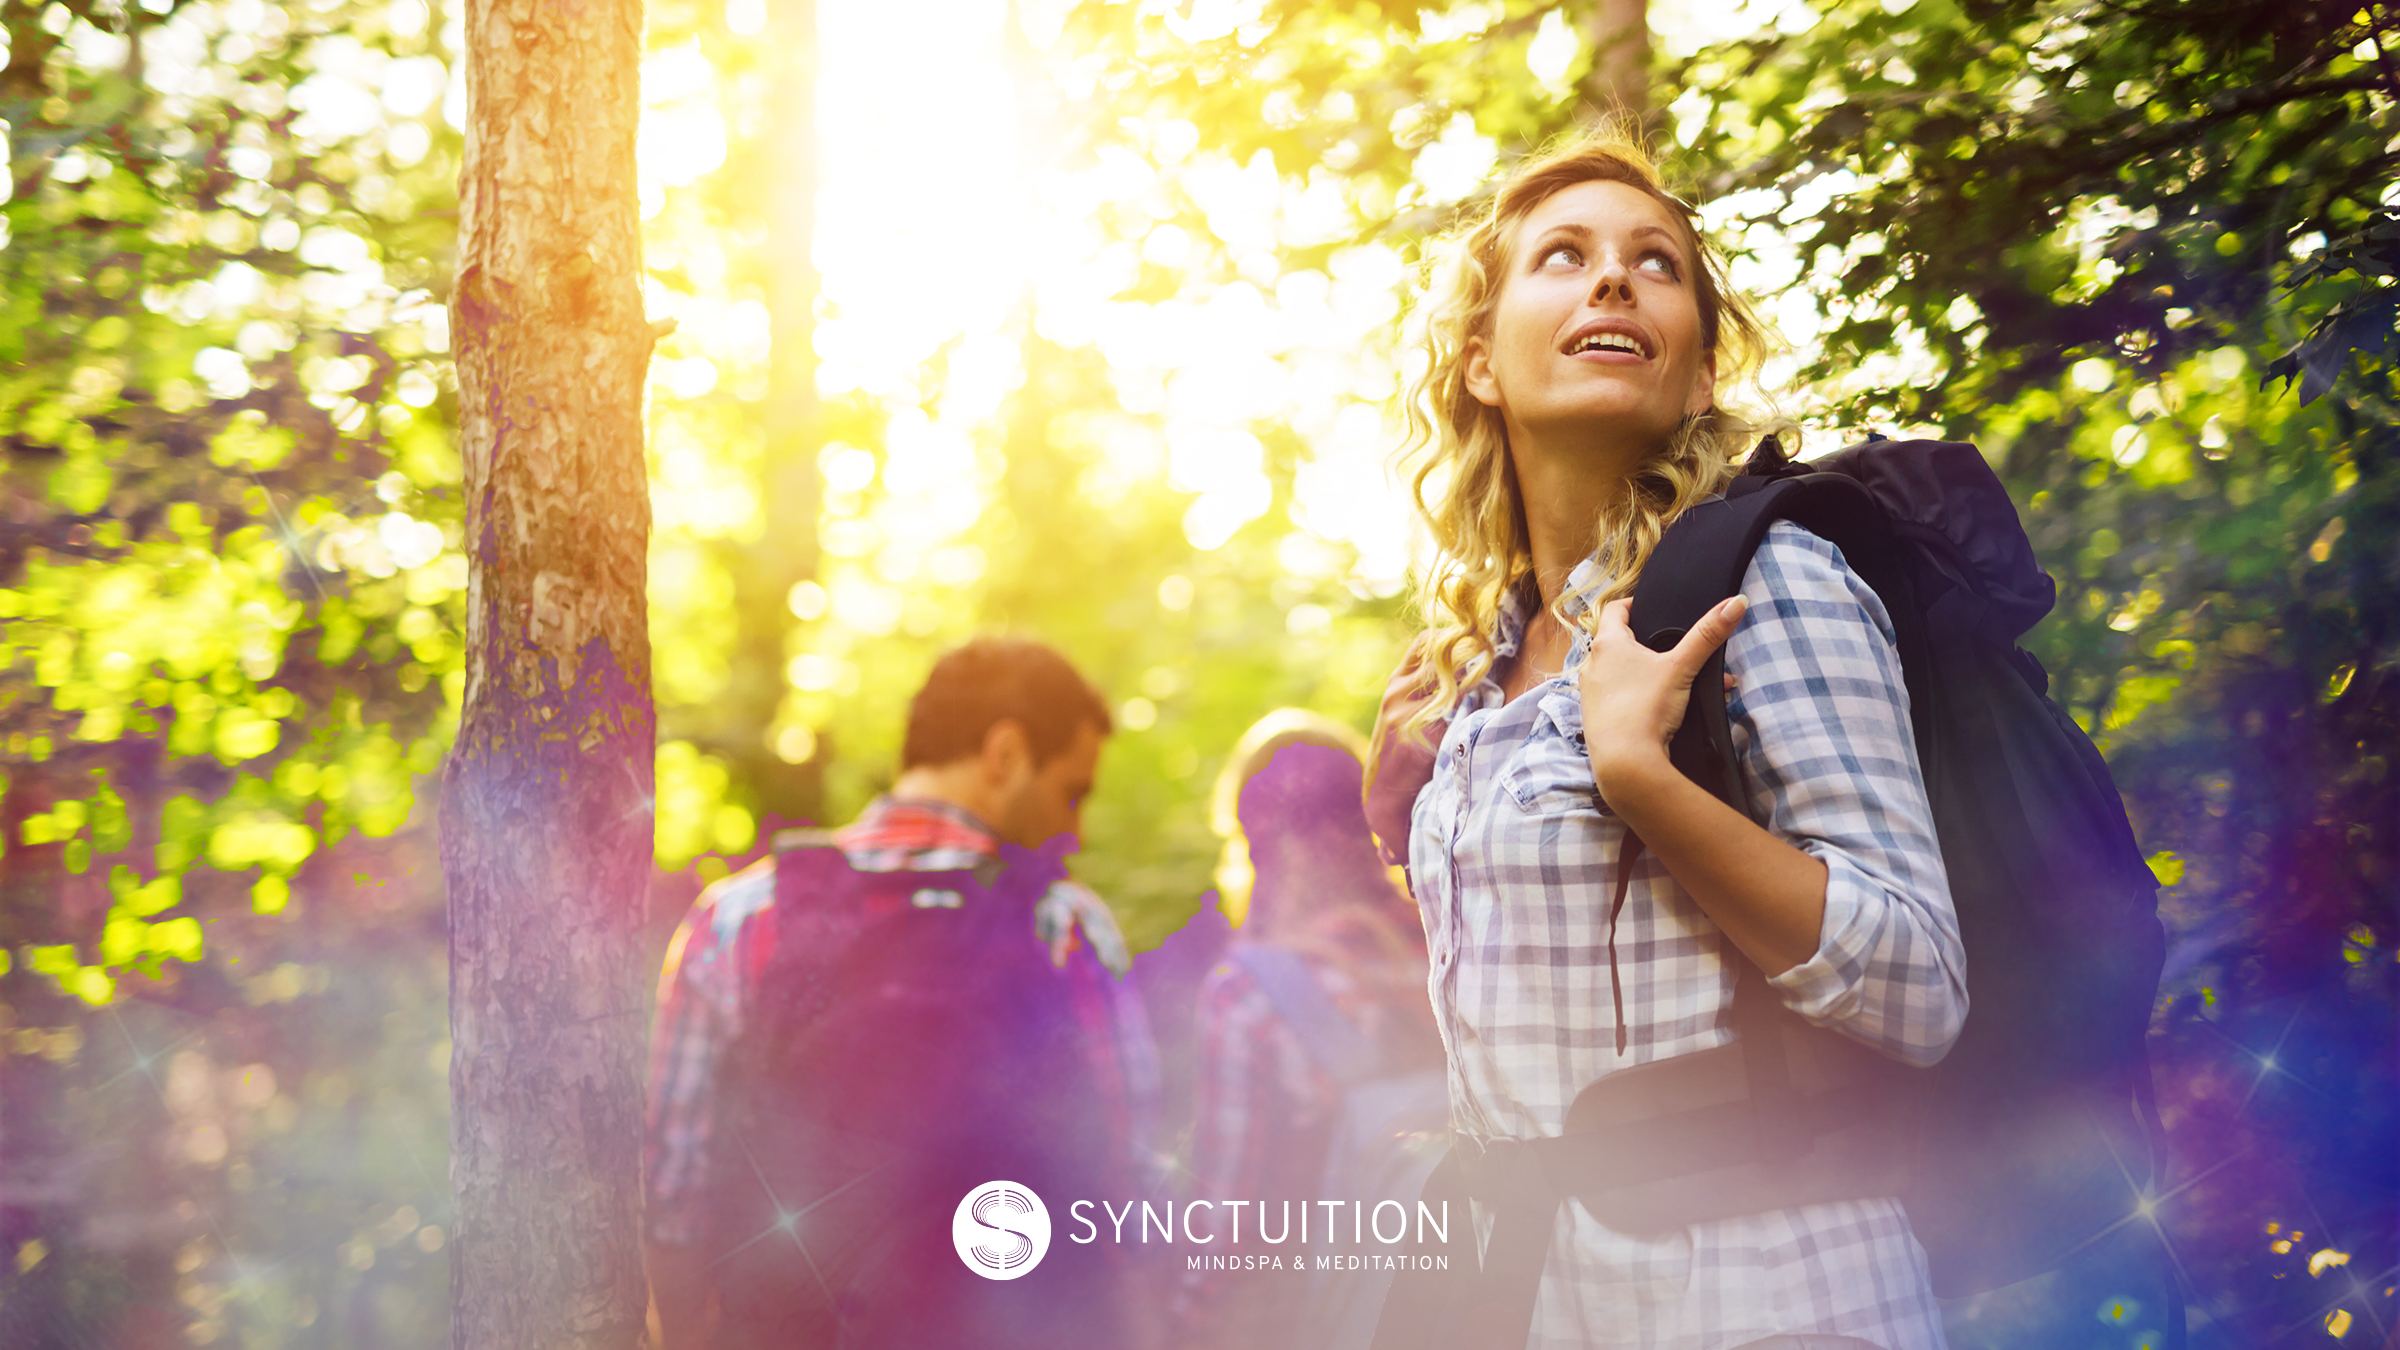 Synctuition’s levels have been recorded in nature.